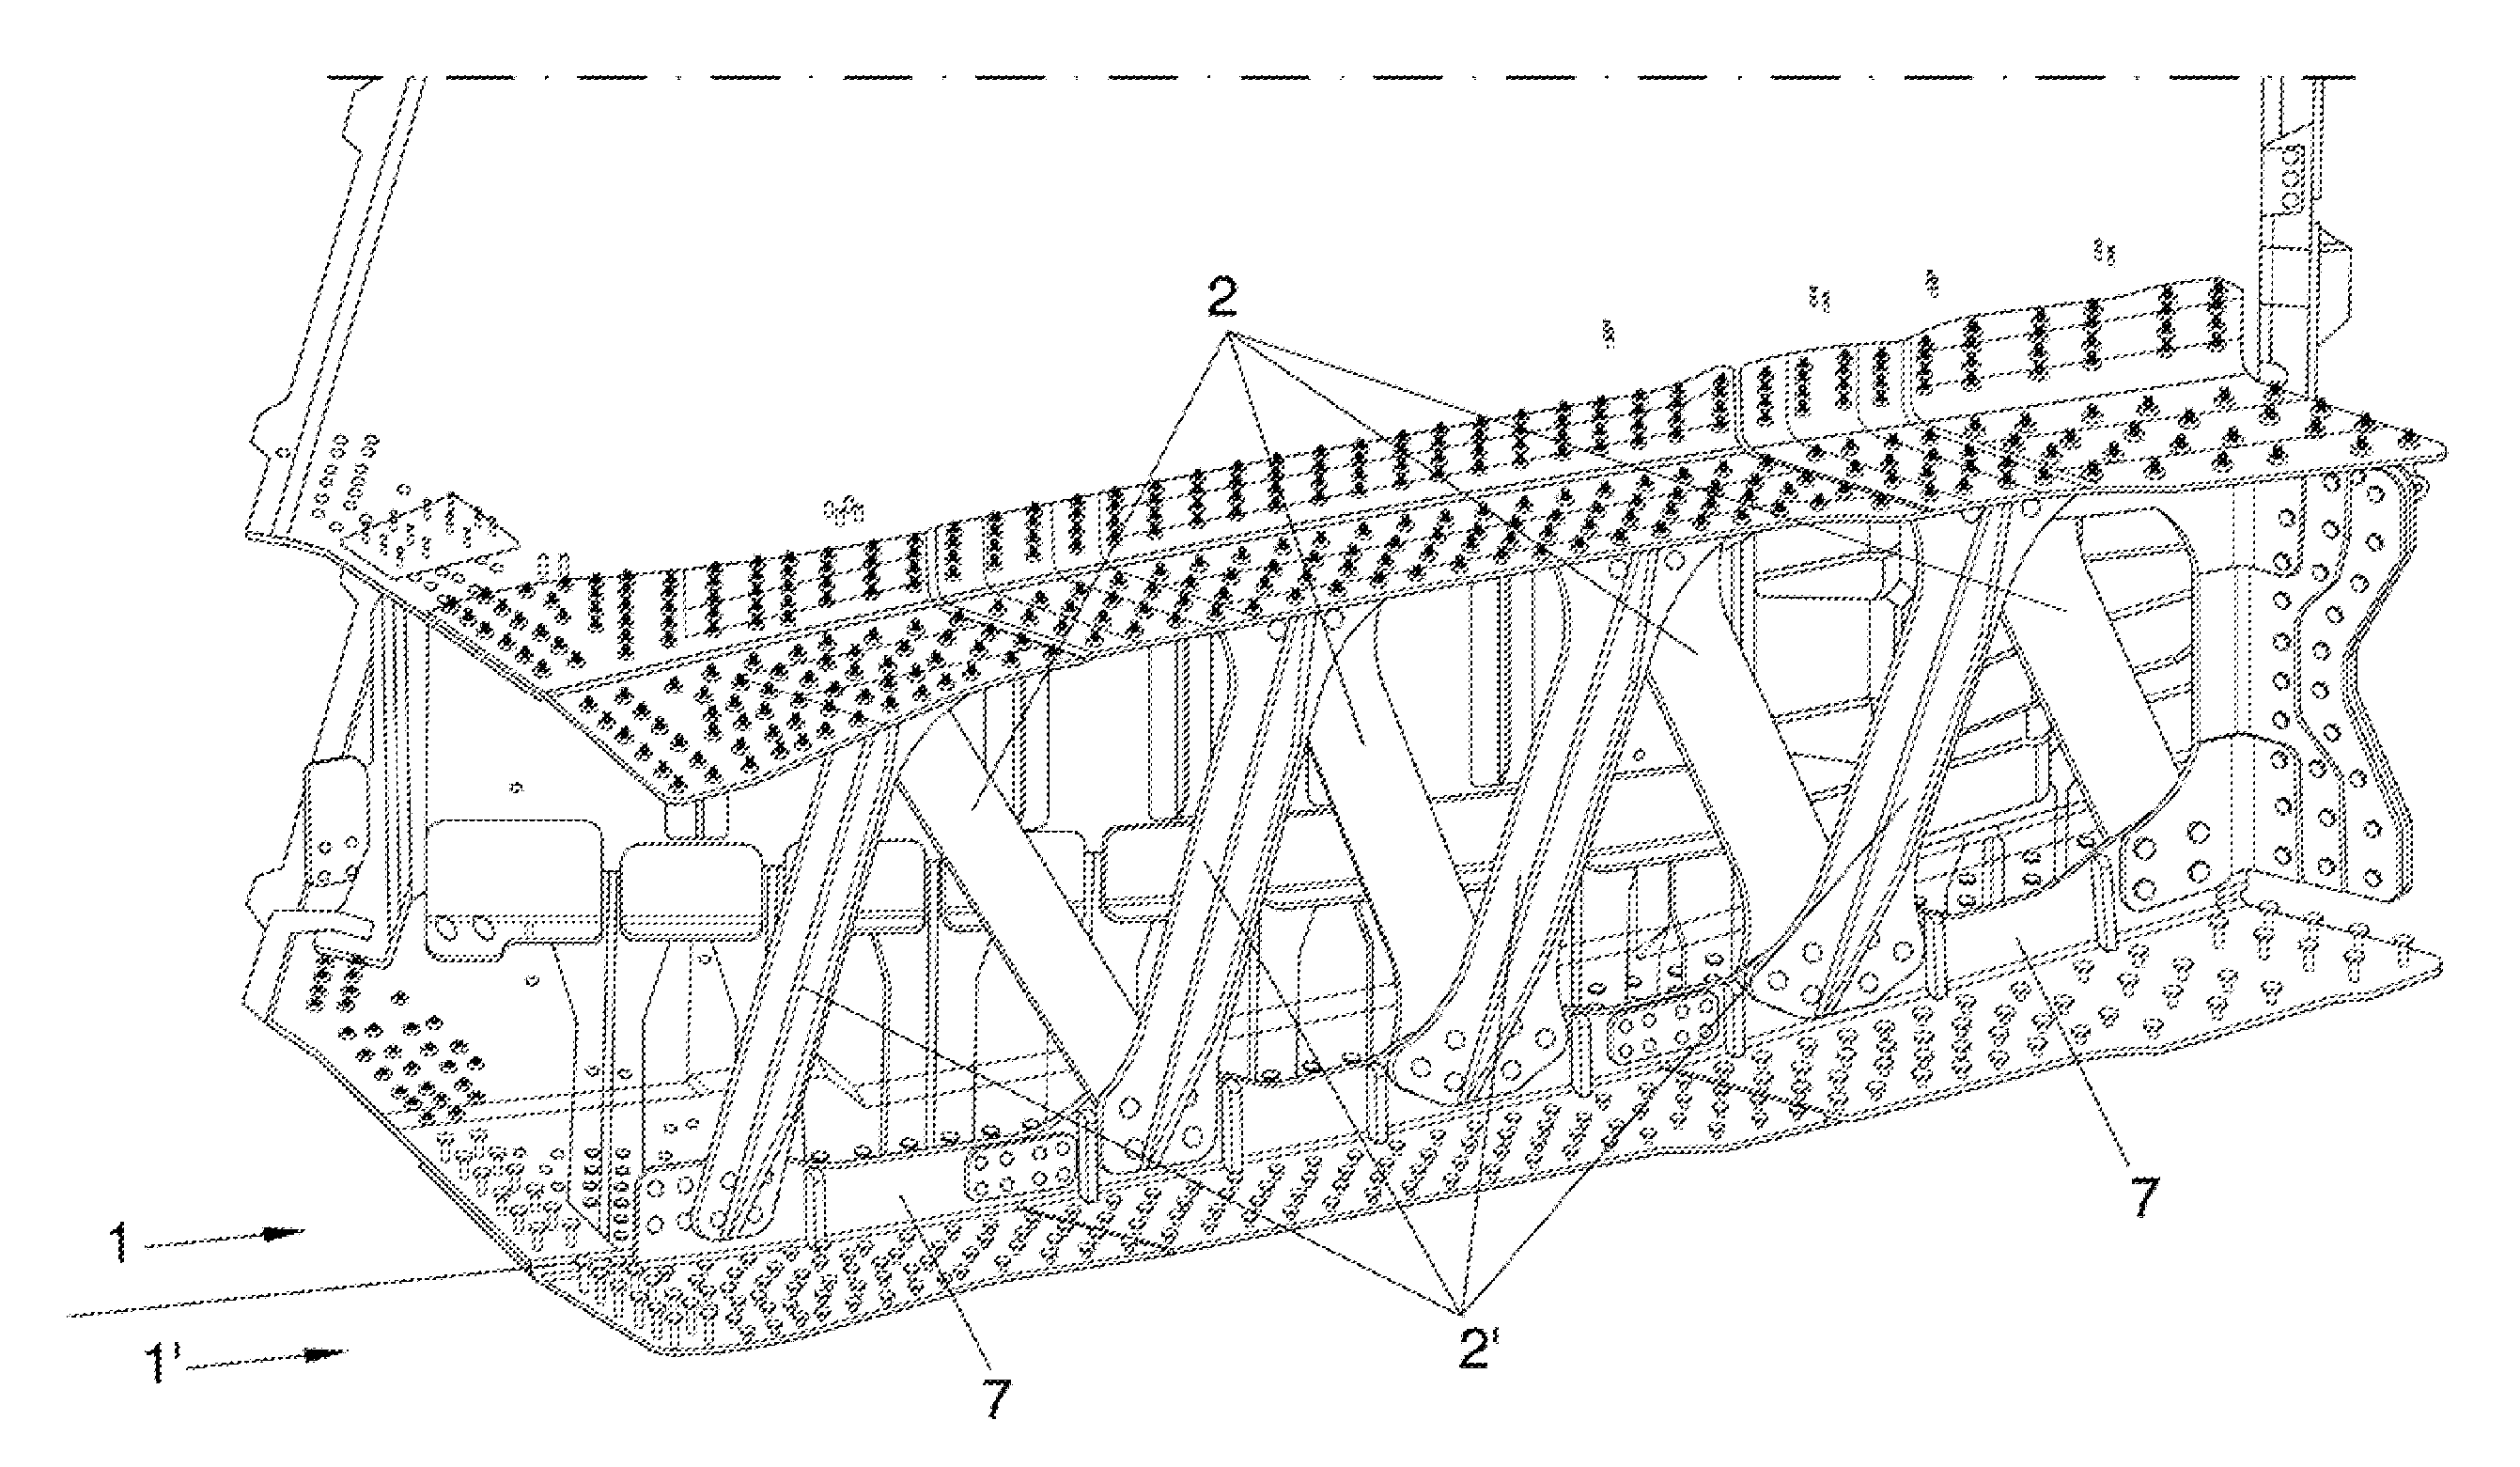 Integration system for lifting surface lateral parts in an aircraft